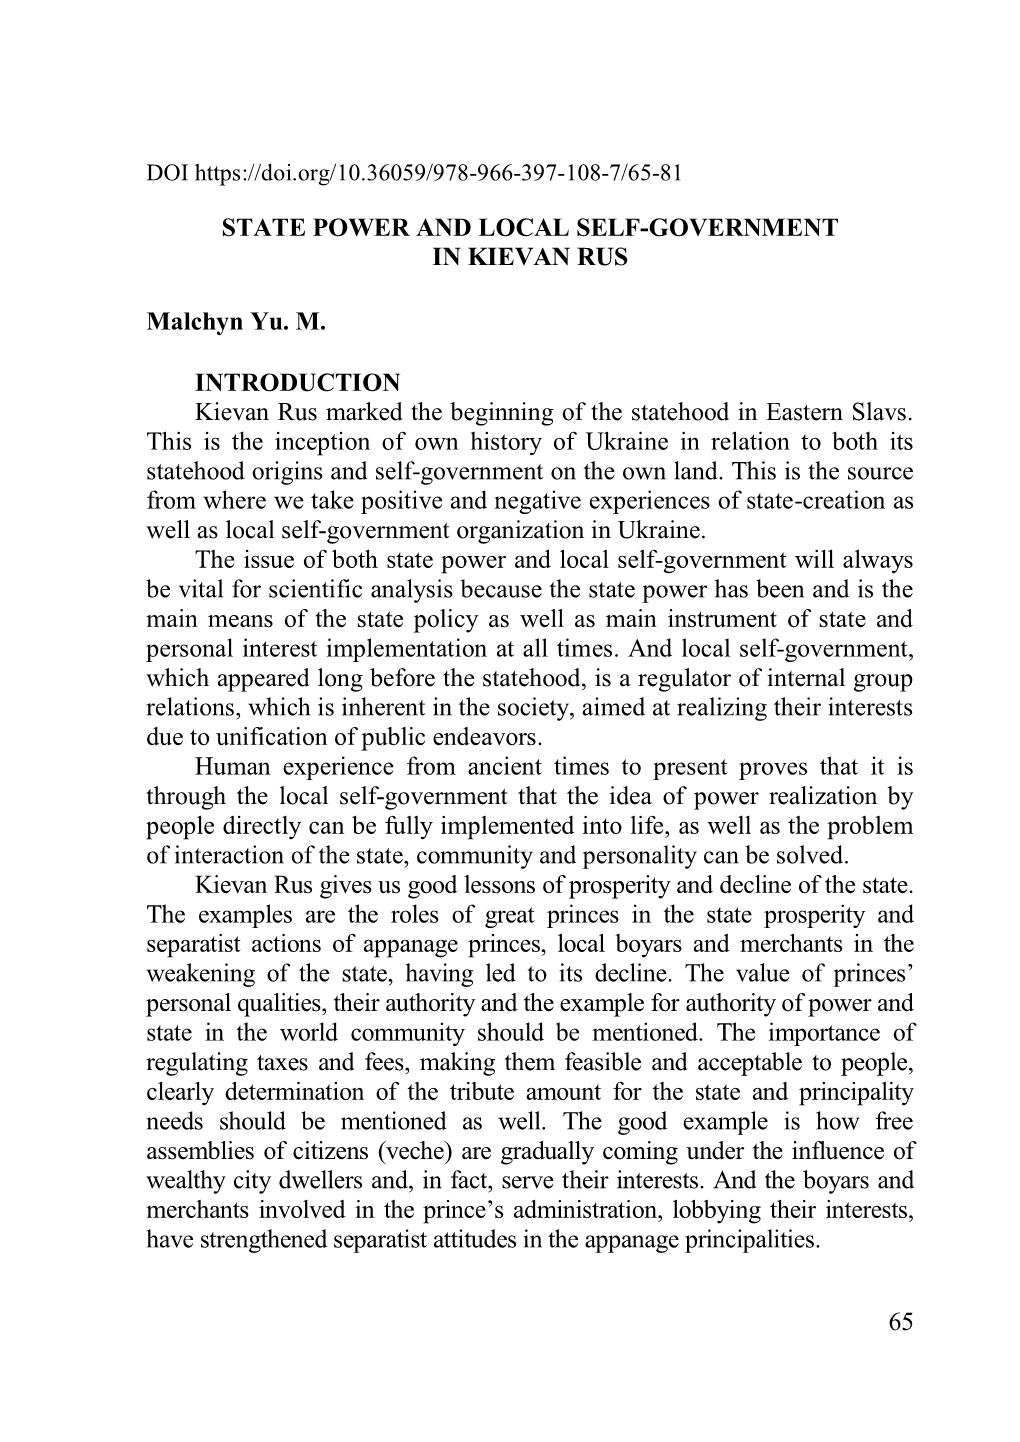 State Power and Local Self-Government in Kievan Rus